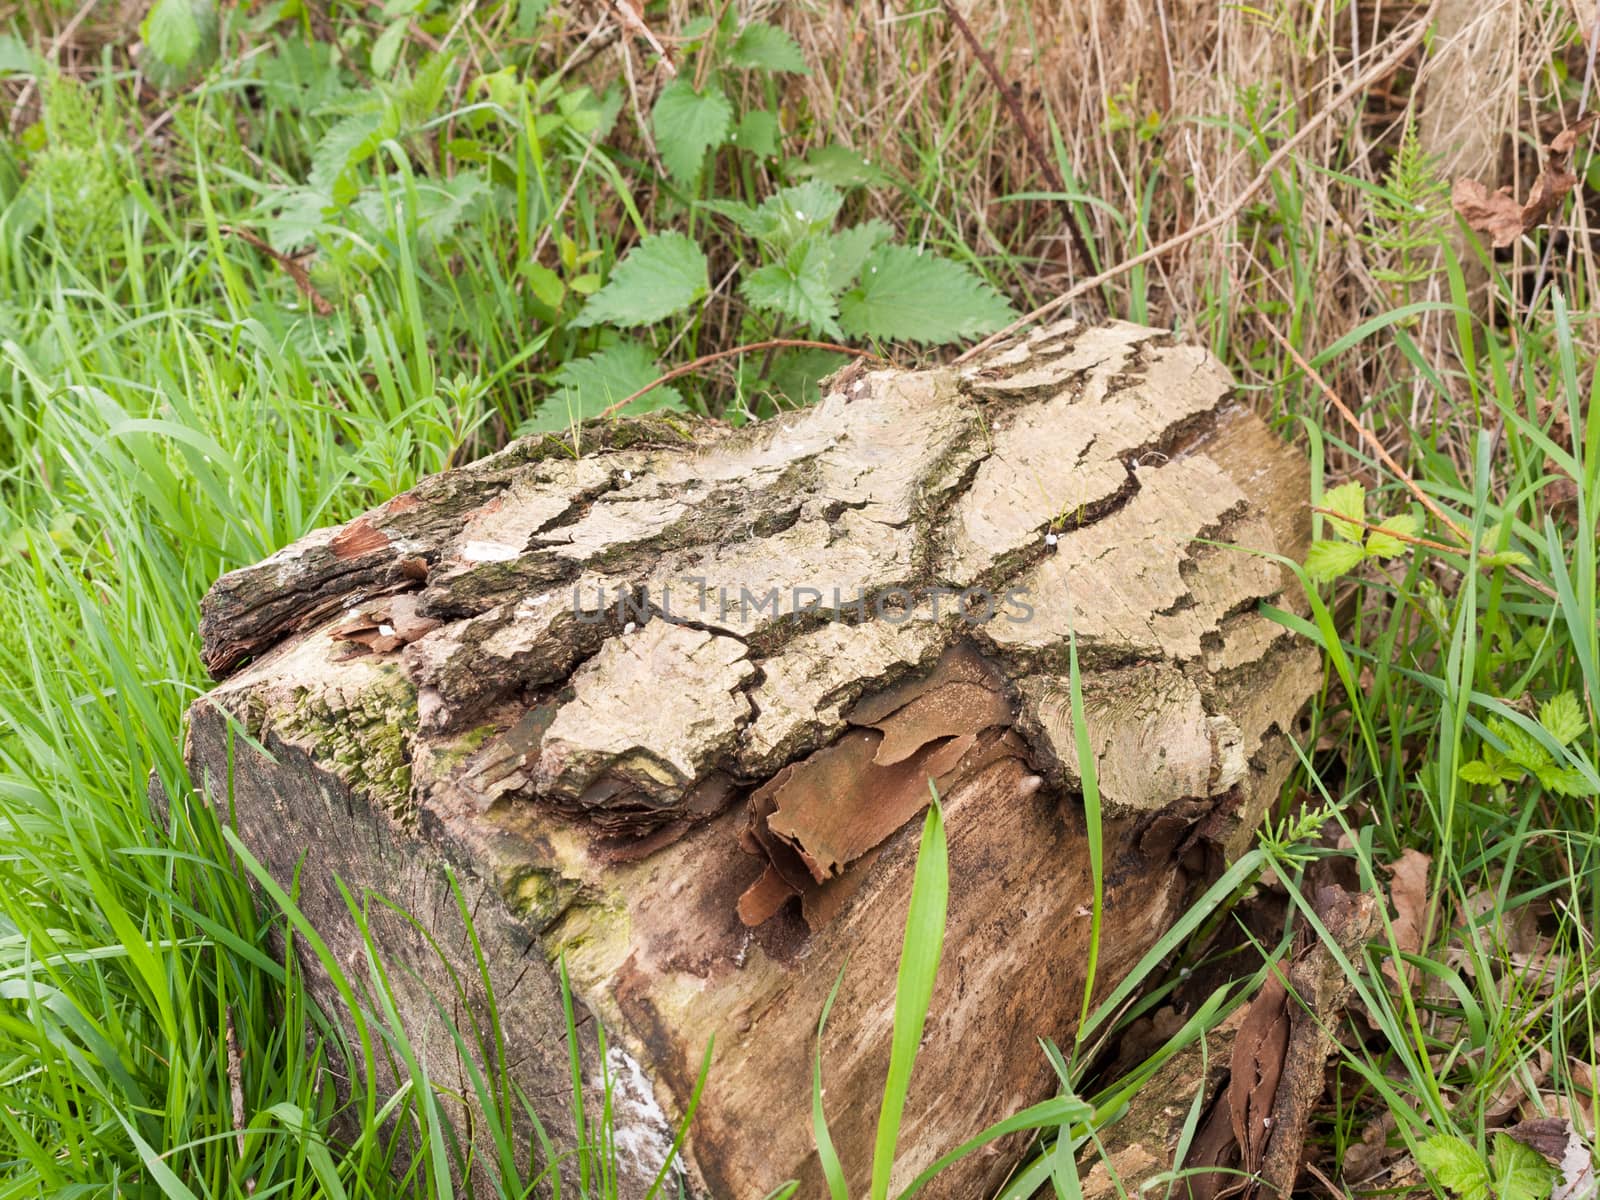 Log Bark of Tree Side on the Ground in the Grass in the Forest with Leaves and Plants Besides